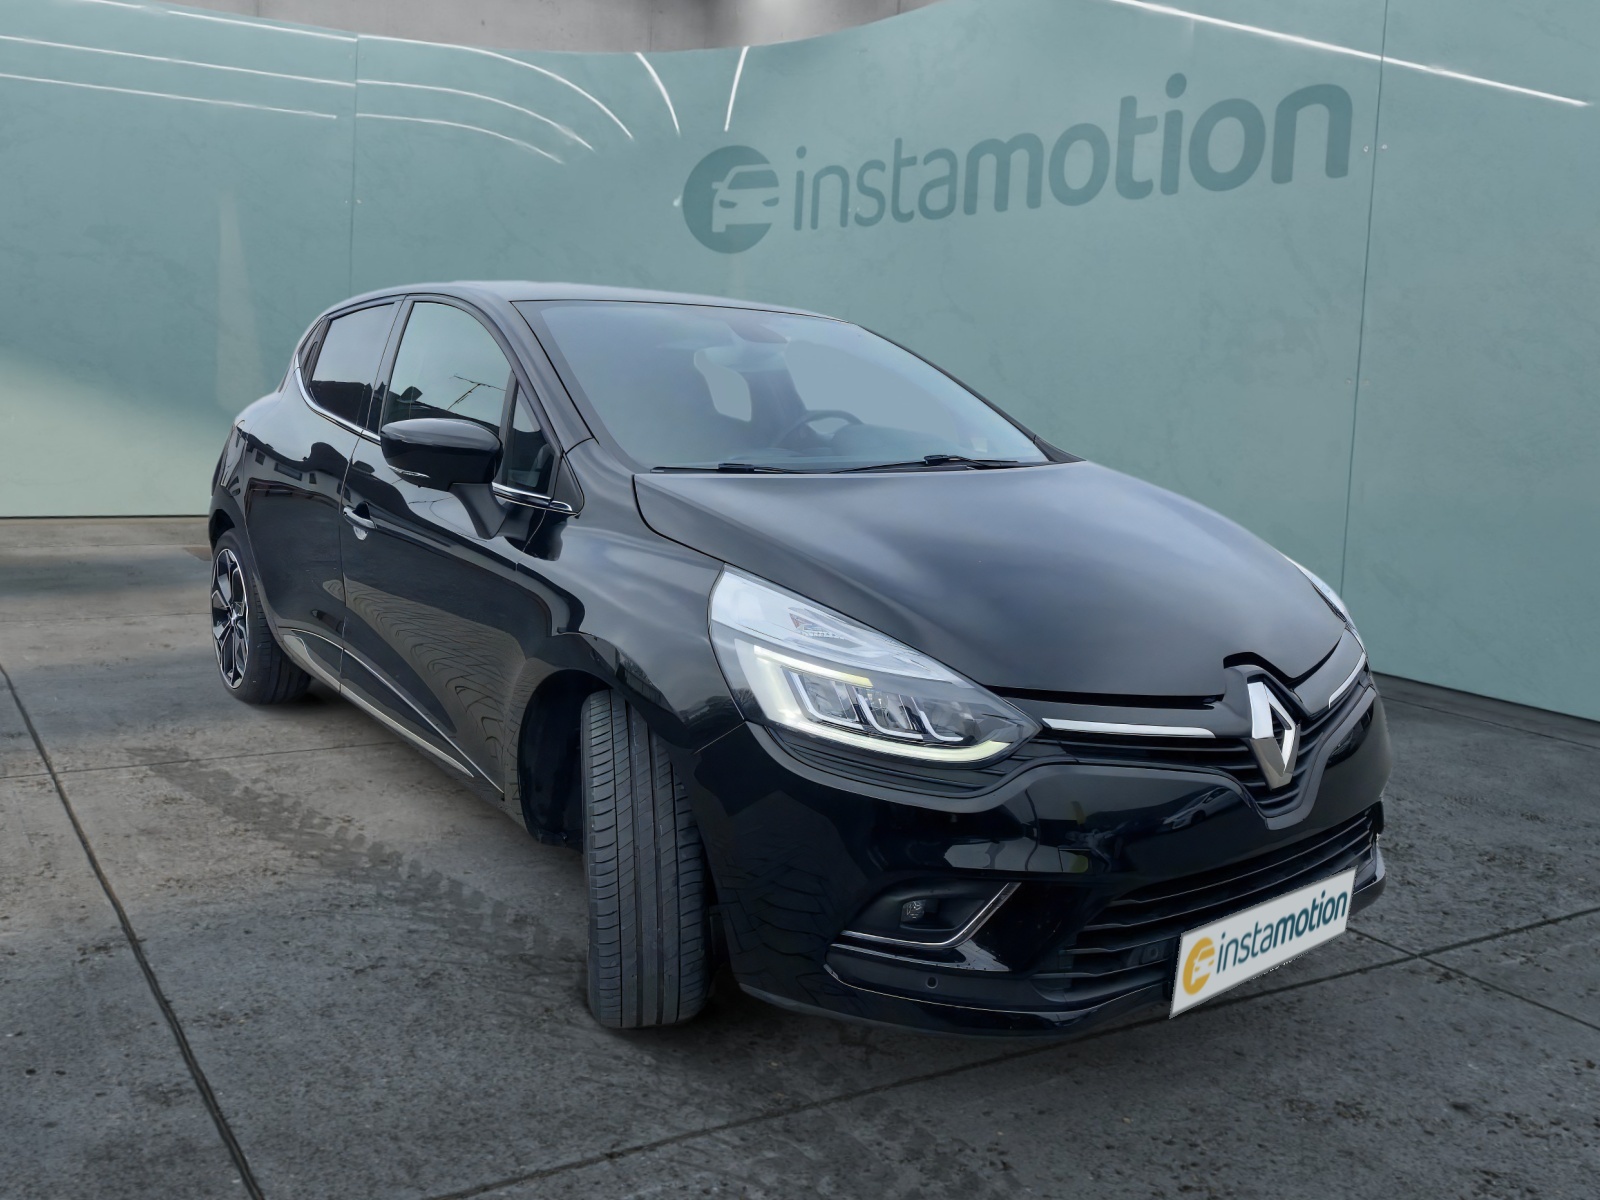 Renault Clio 0.9 IV TCe 90 eco² Intens